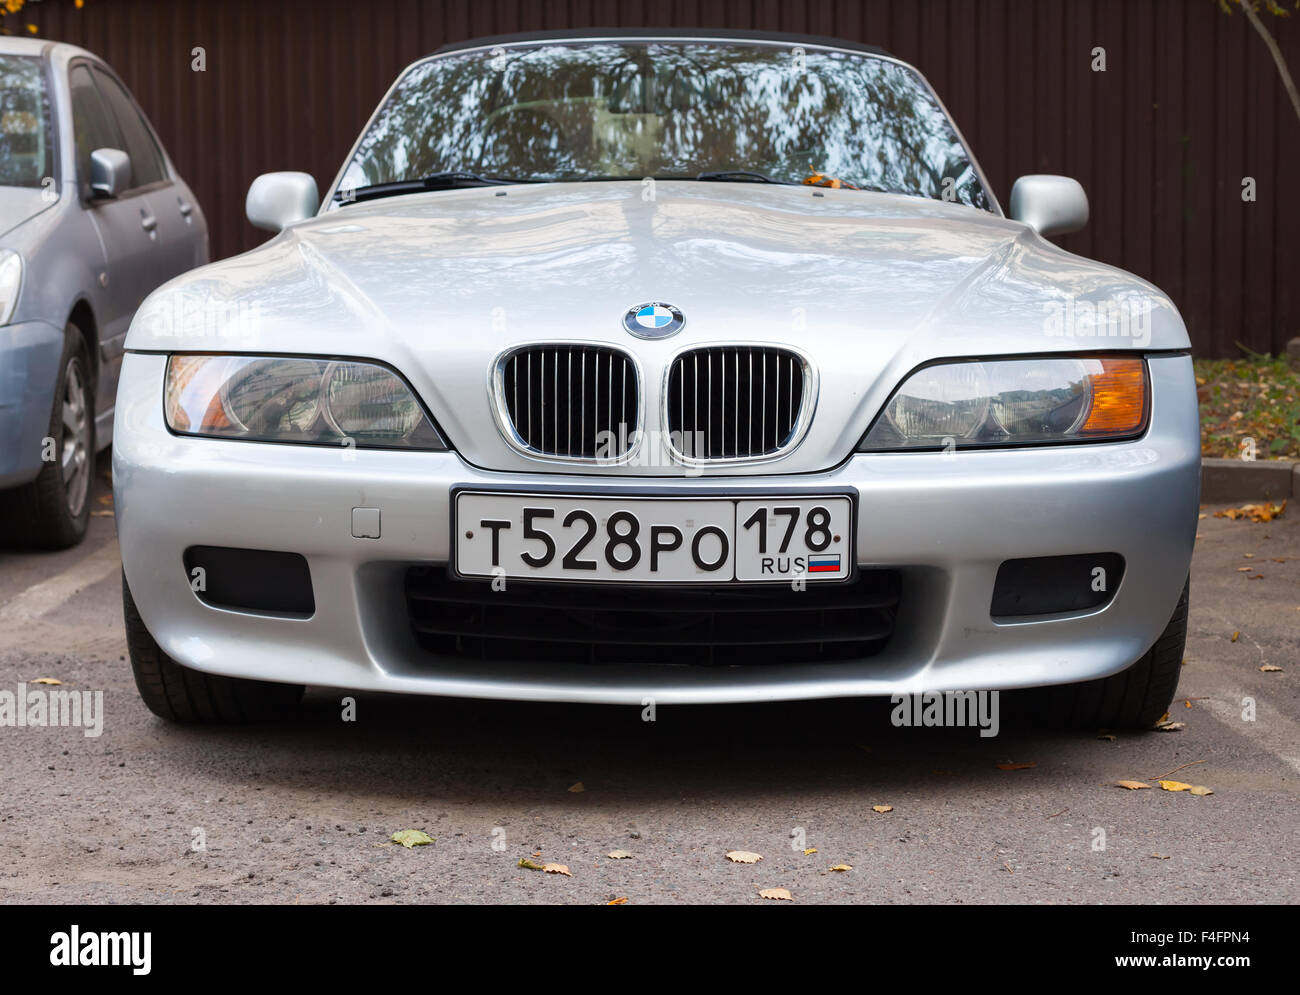 Saint-Petersburg, Russia - October 17, 2015: Silver gray BMW Z3 car stands parked on the roadside, front view Stock Photo